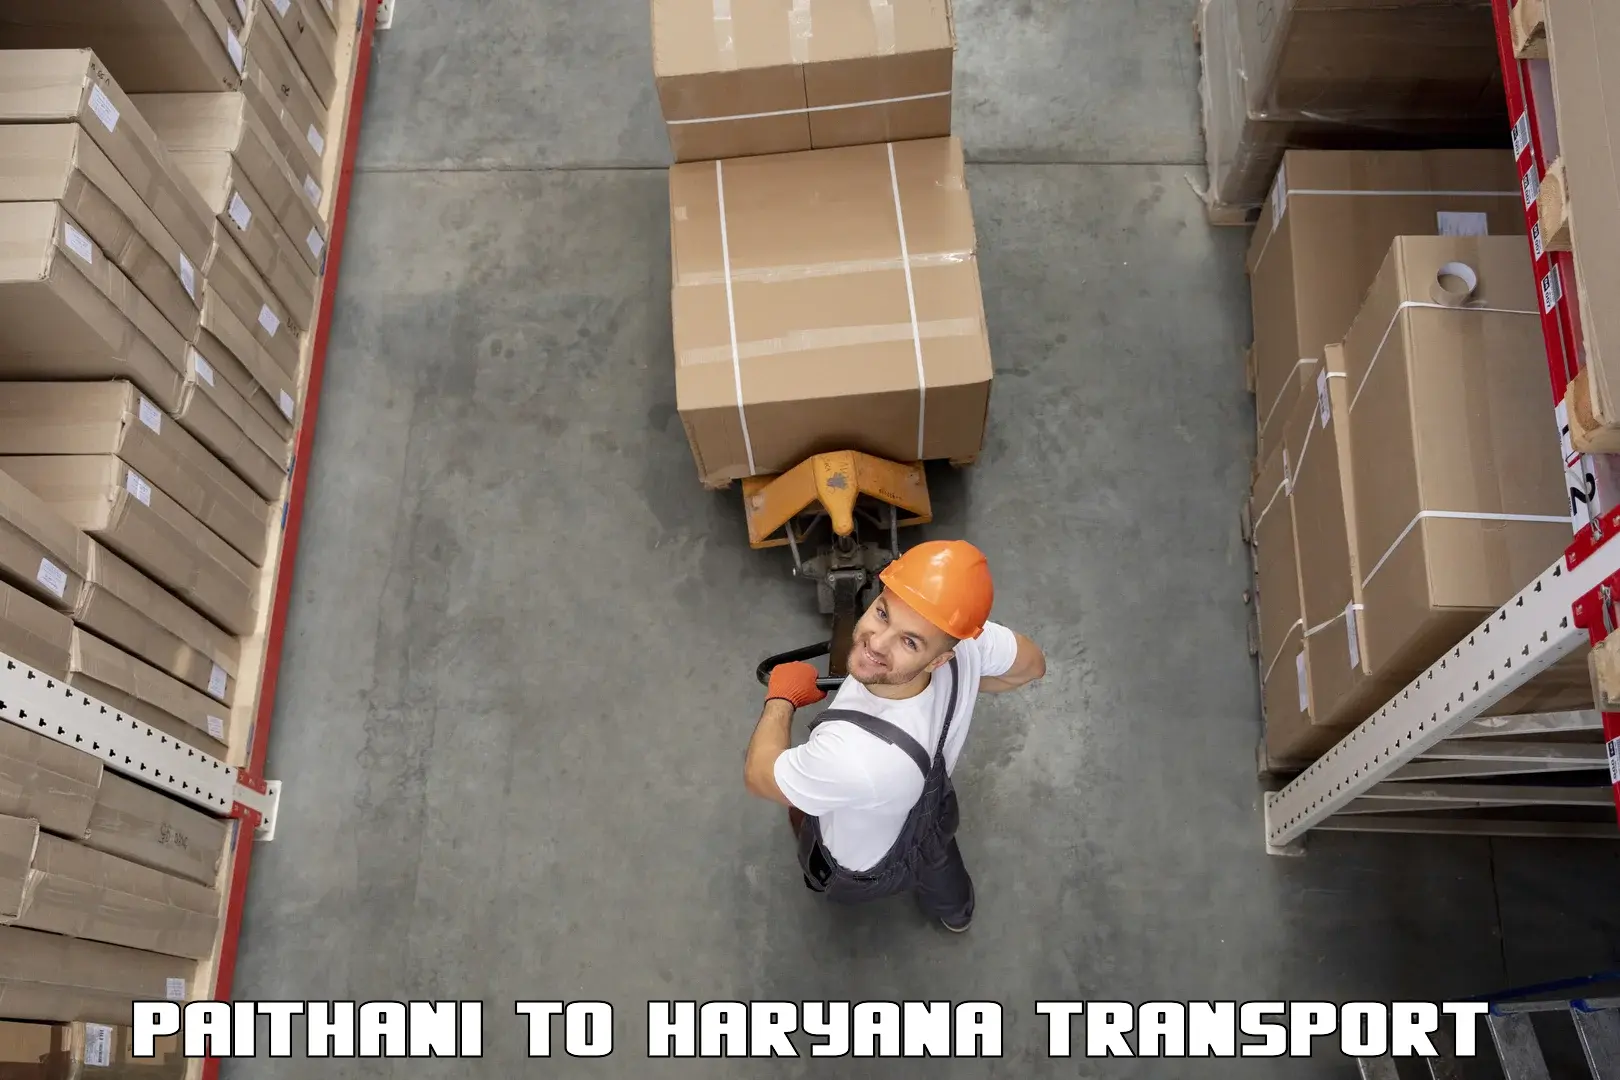 Part load transport service in India Paithani to Bhiwani